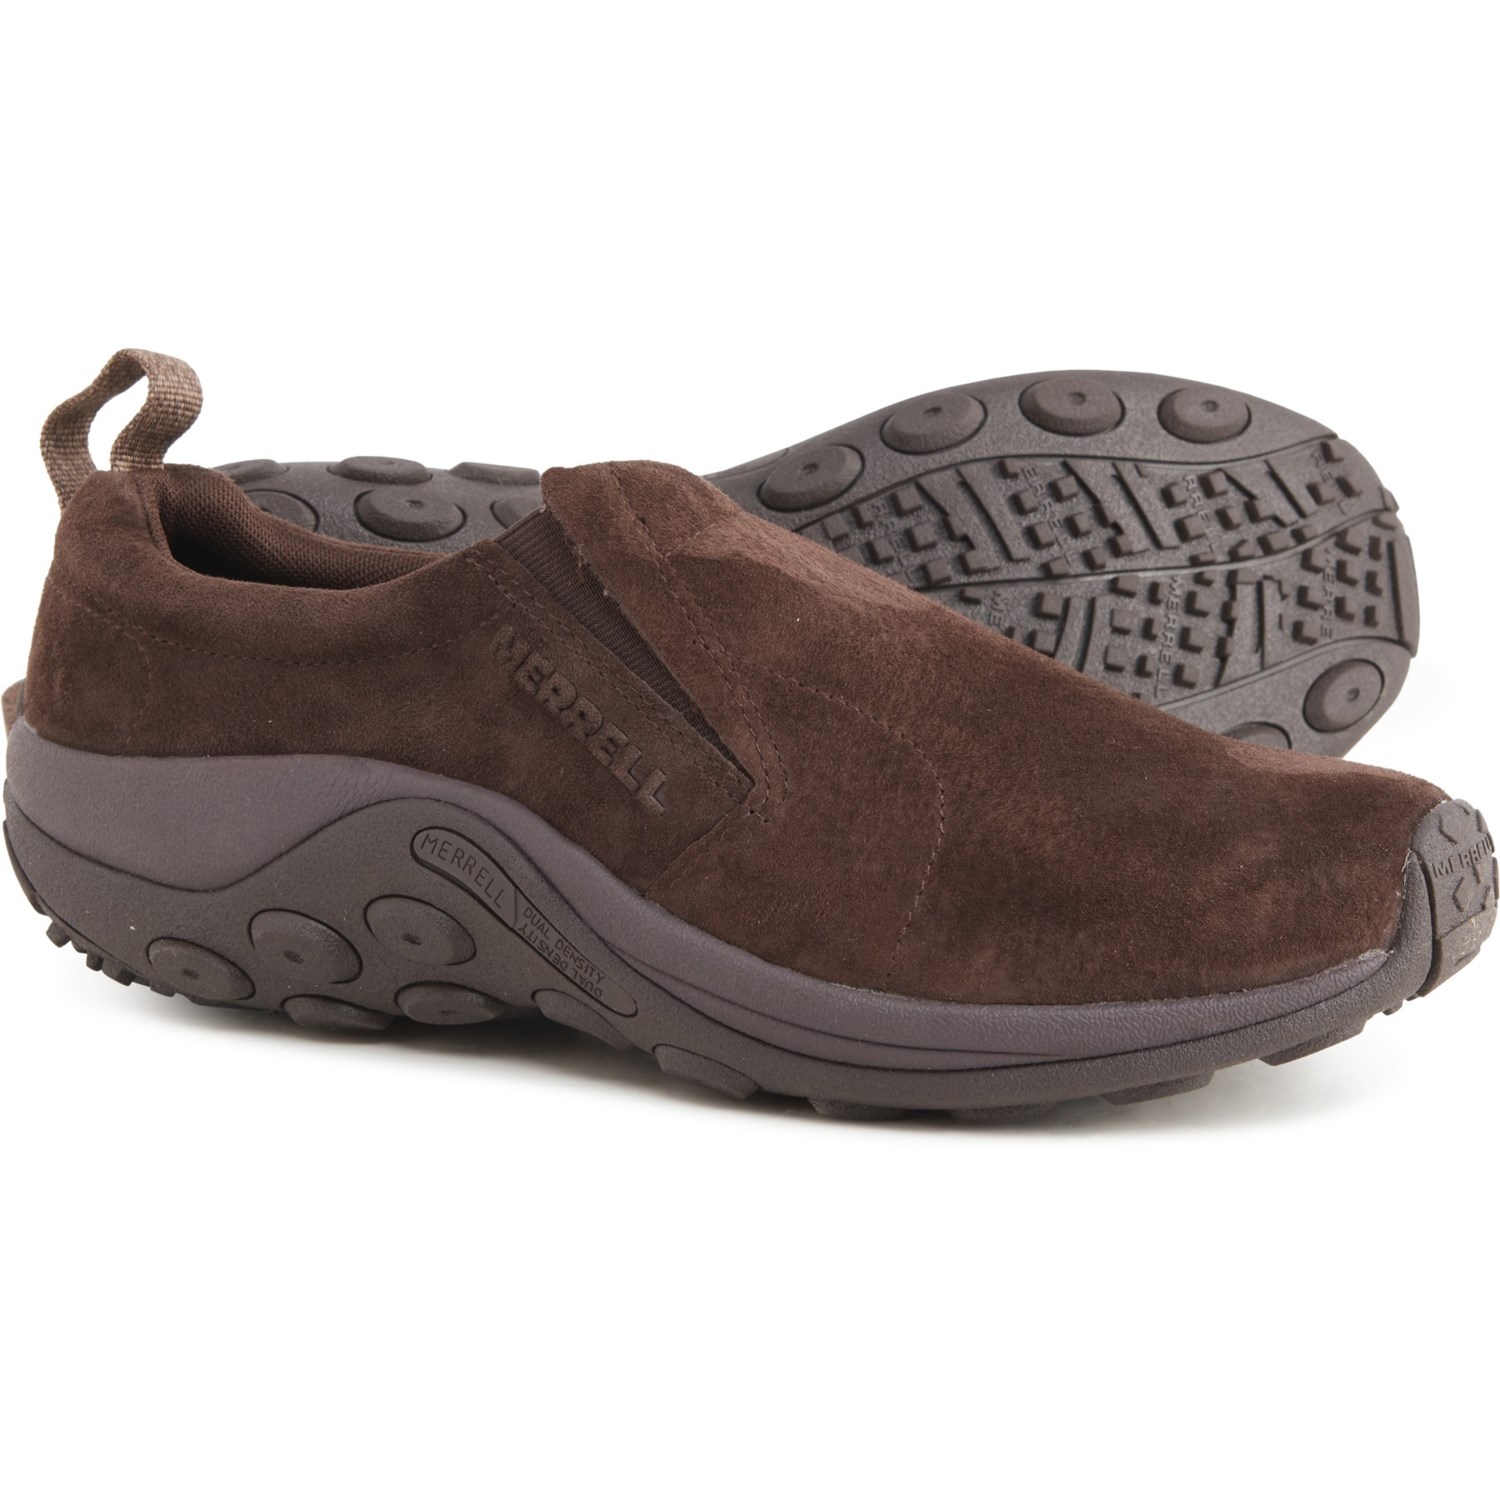 Merrell Jungle Moc Rinse Shoes (For Men) - Save 28%